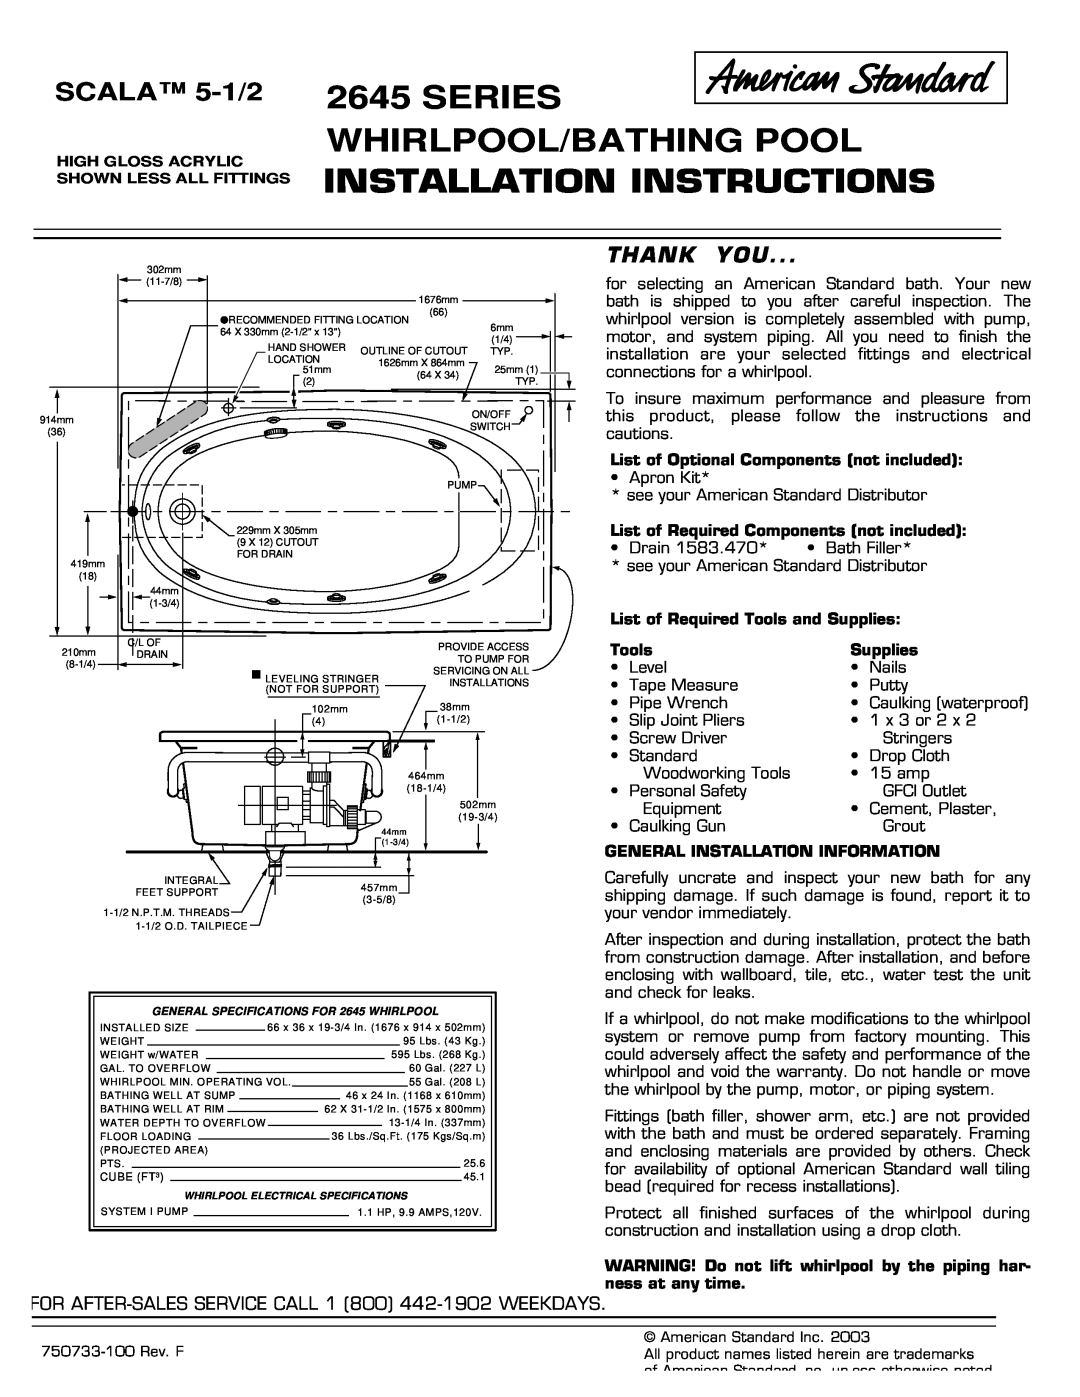 American Standard 2645 Series installation instructions Series Whirlpool/Bathing Pool, Installation Instructions, Tools 